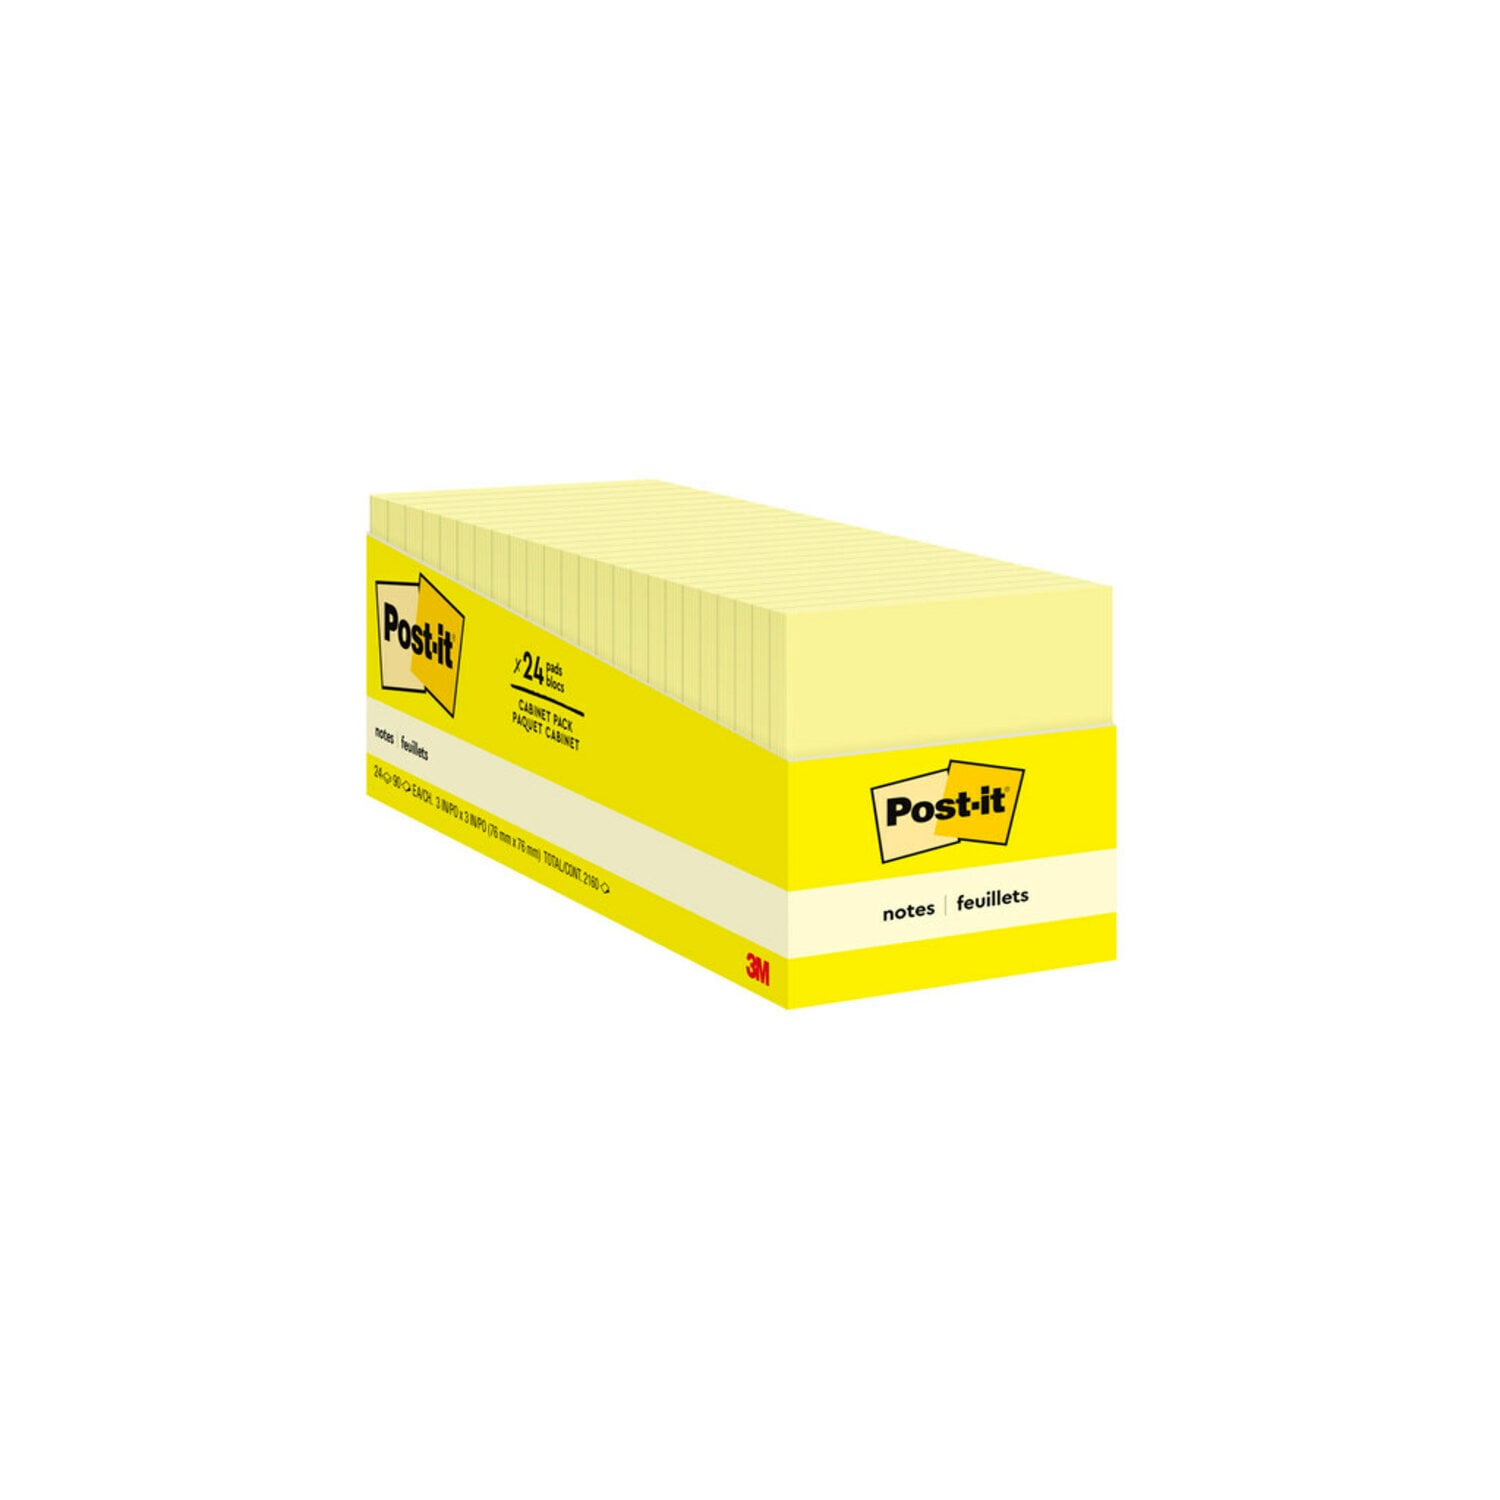 7100249259 - Post-it Notes 654-24CP, 3 in x 3 in (76 mm x 76 mm), Canary Yellow